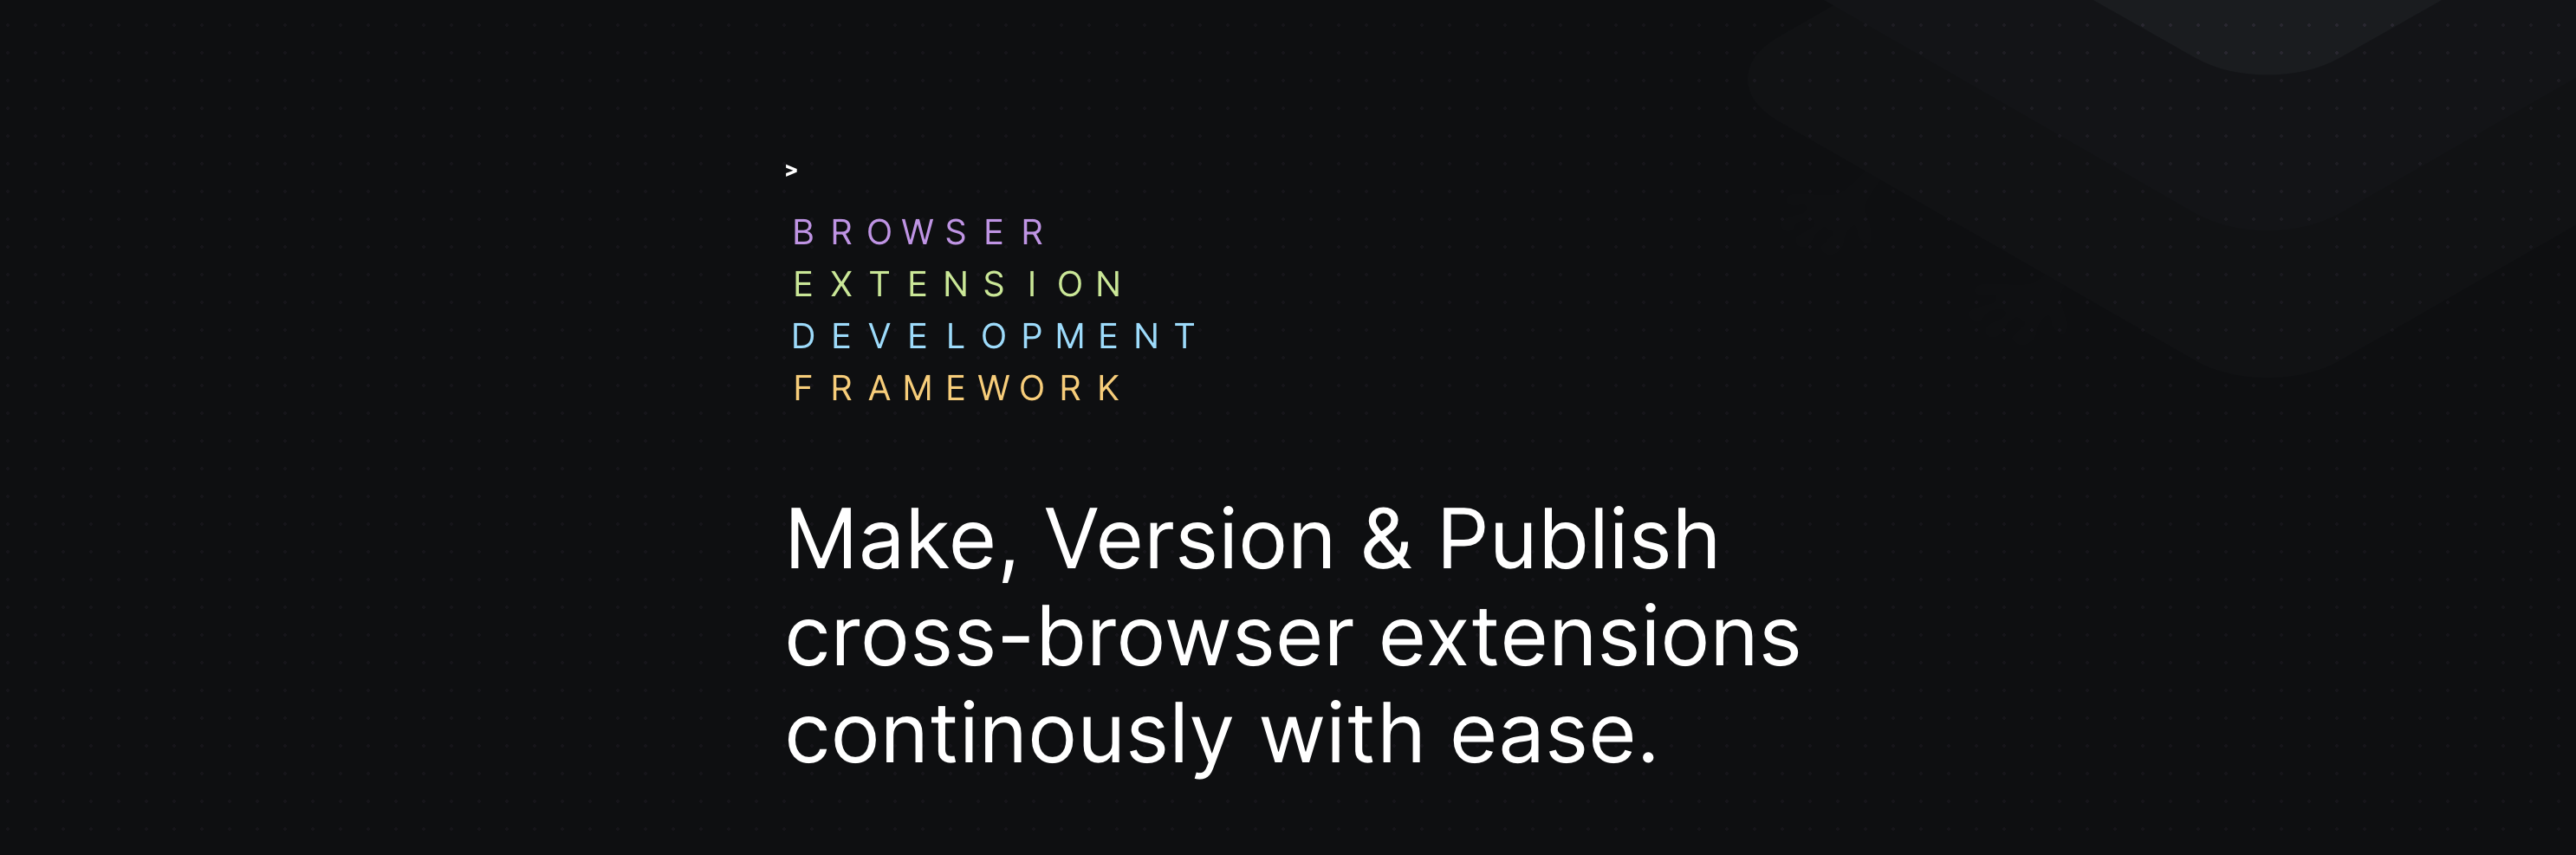 Bedframe - Make, Version & Publish cross-browser extensions continously with ease